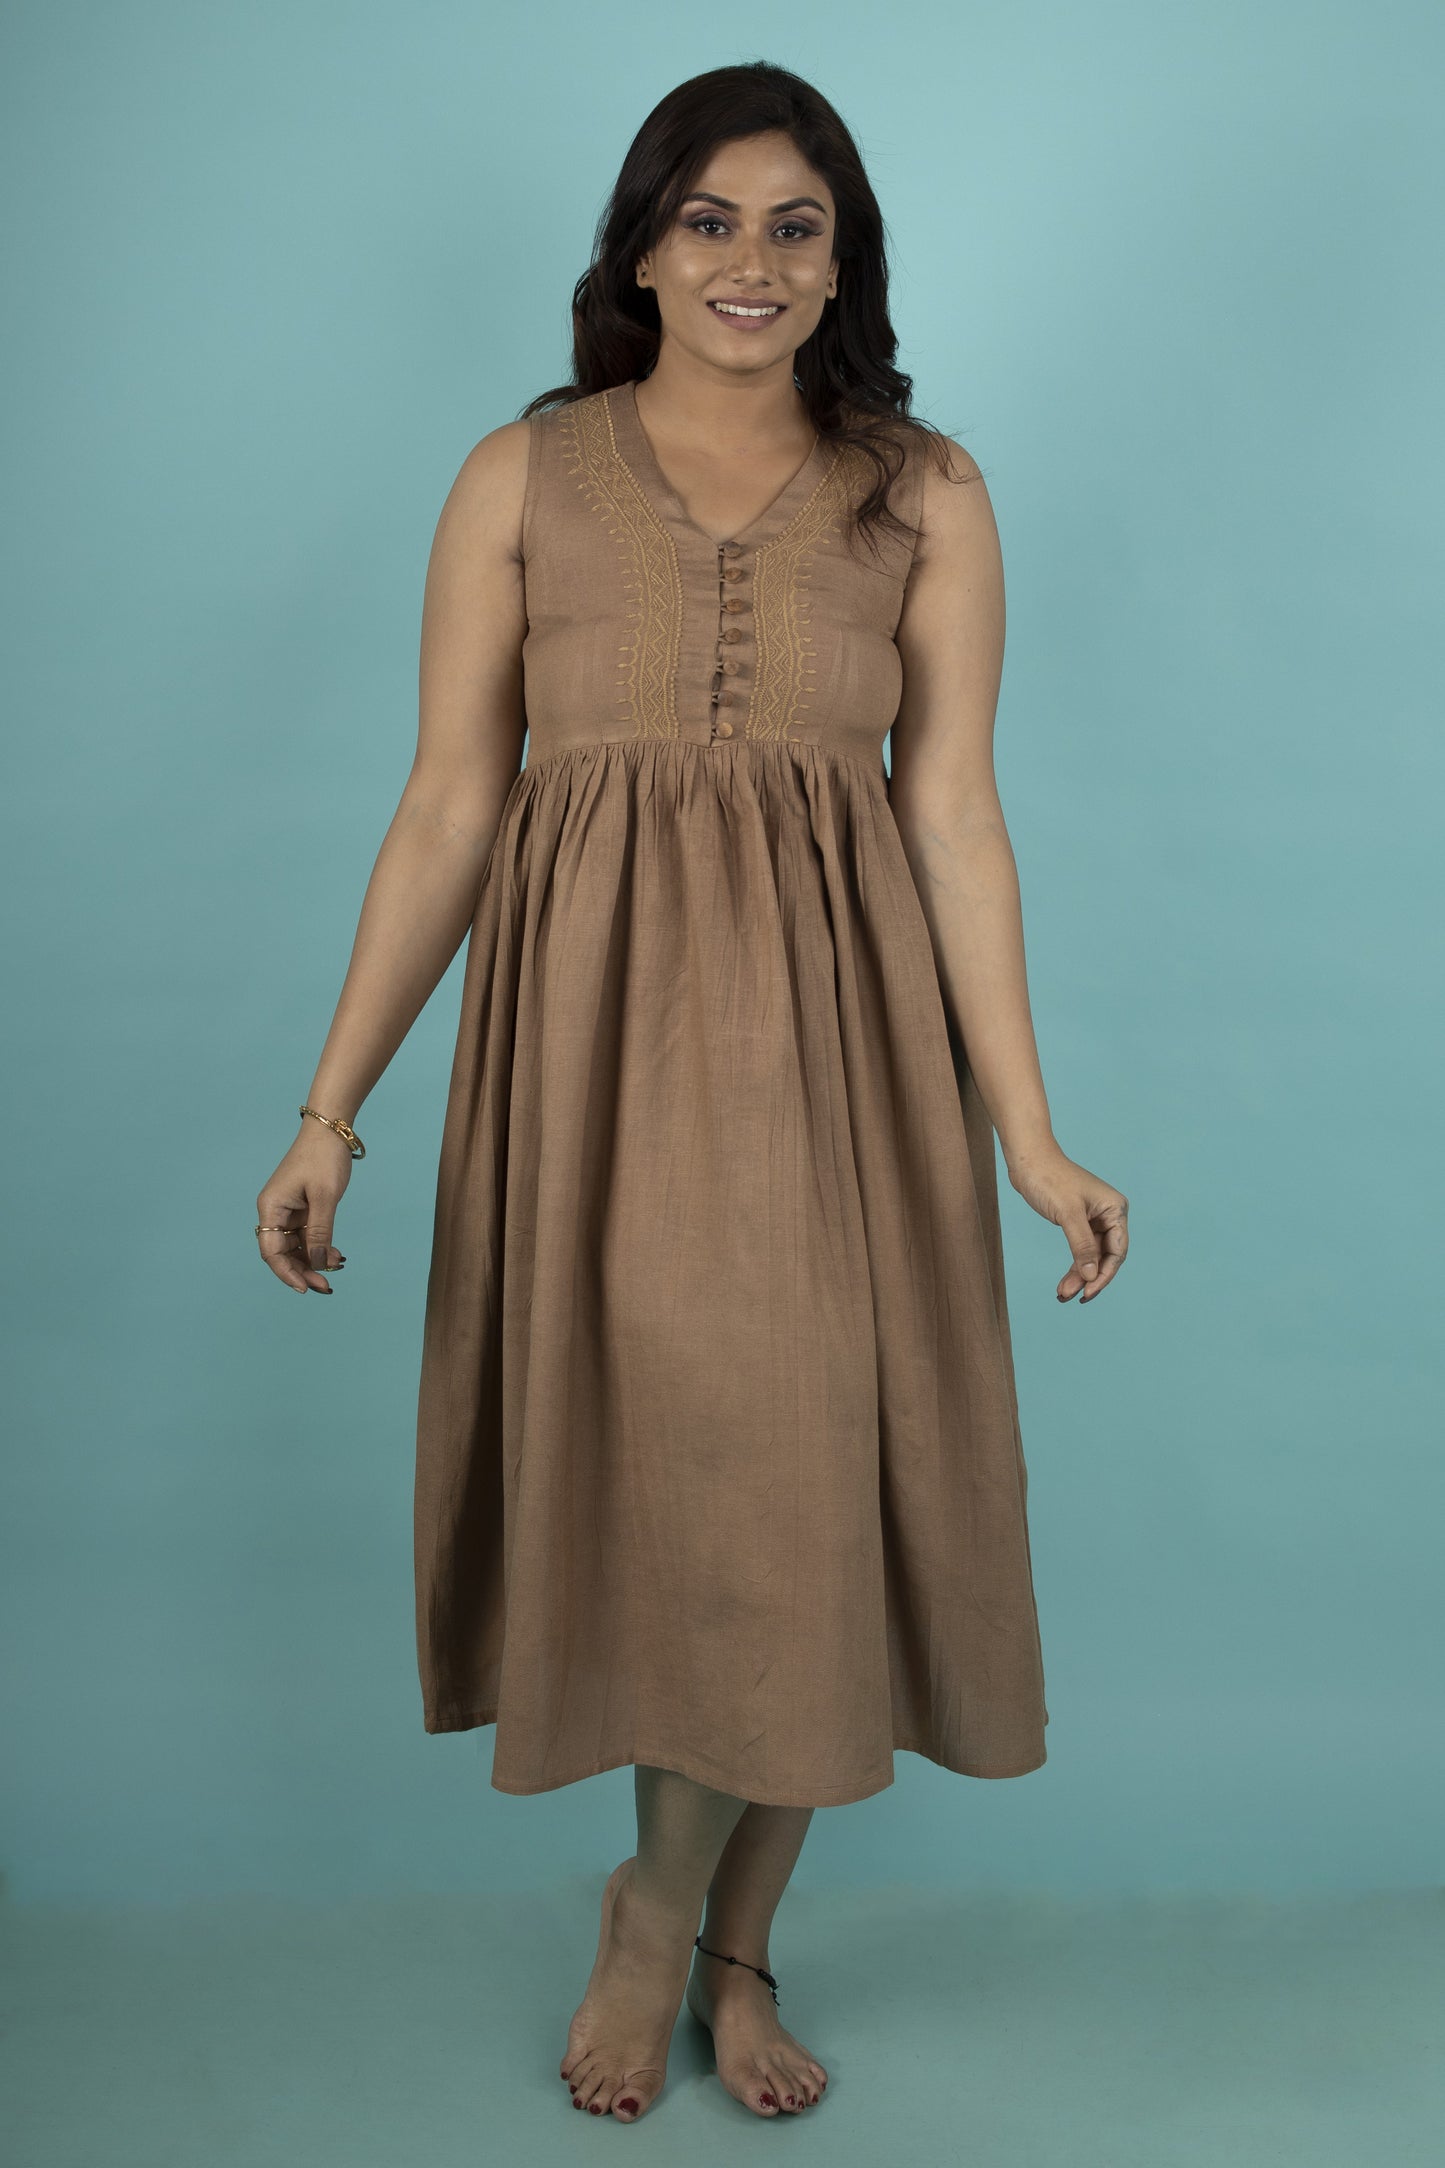 POTTERS CLAY BROWN GATHERED DRESS